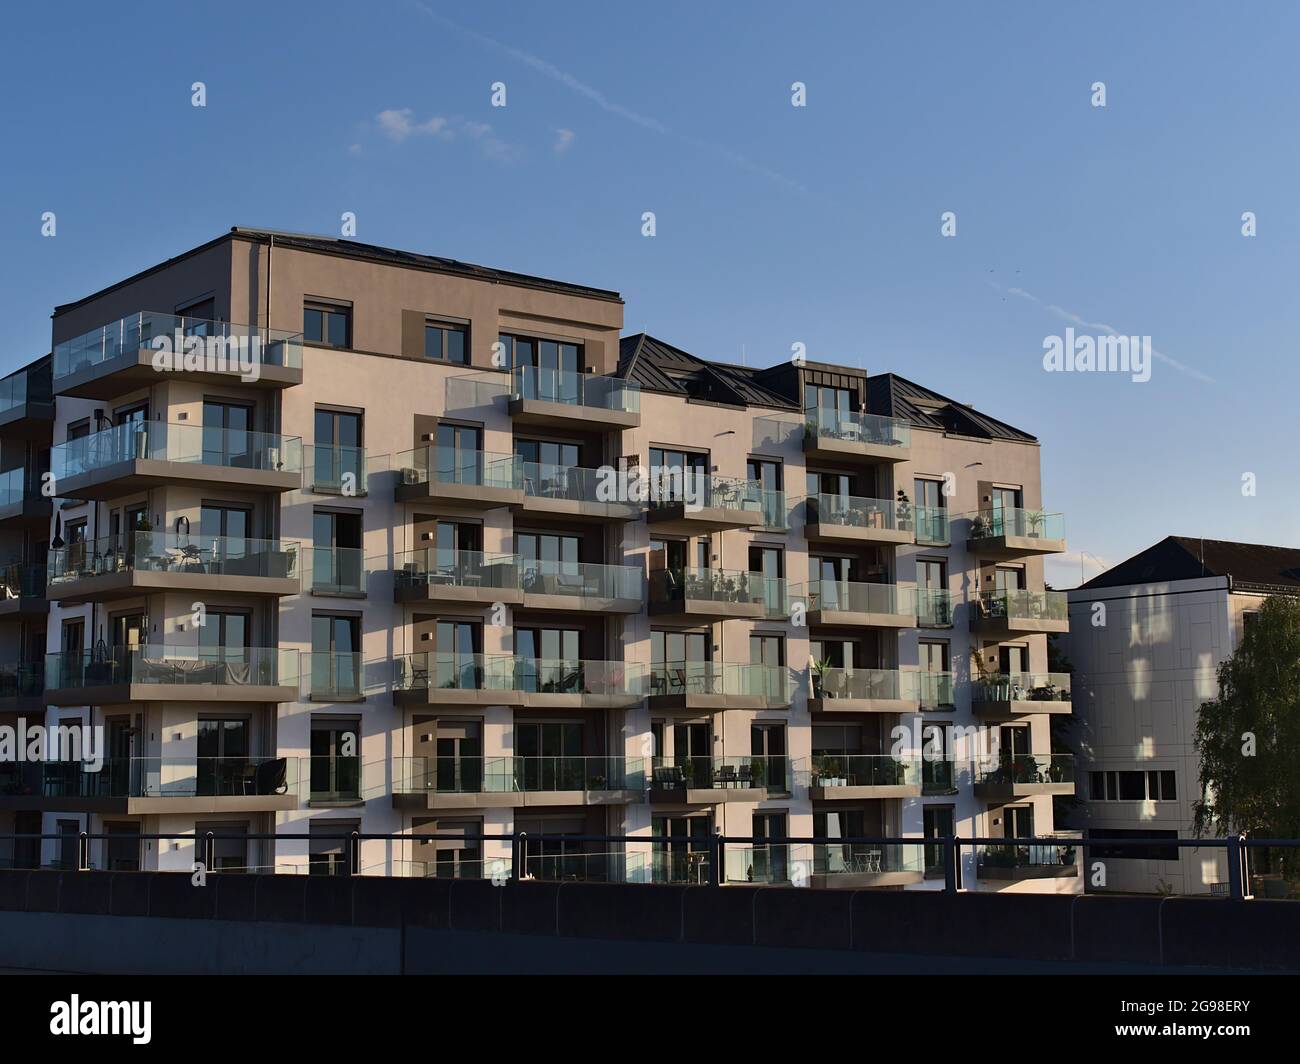 View of modern residential multi-family apartment building in luxury quality with balconies with glass railings in the evening sun with blue sky. Stock Photo